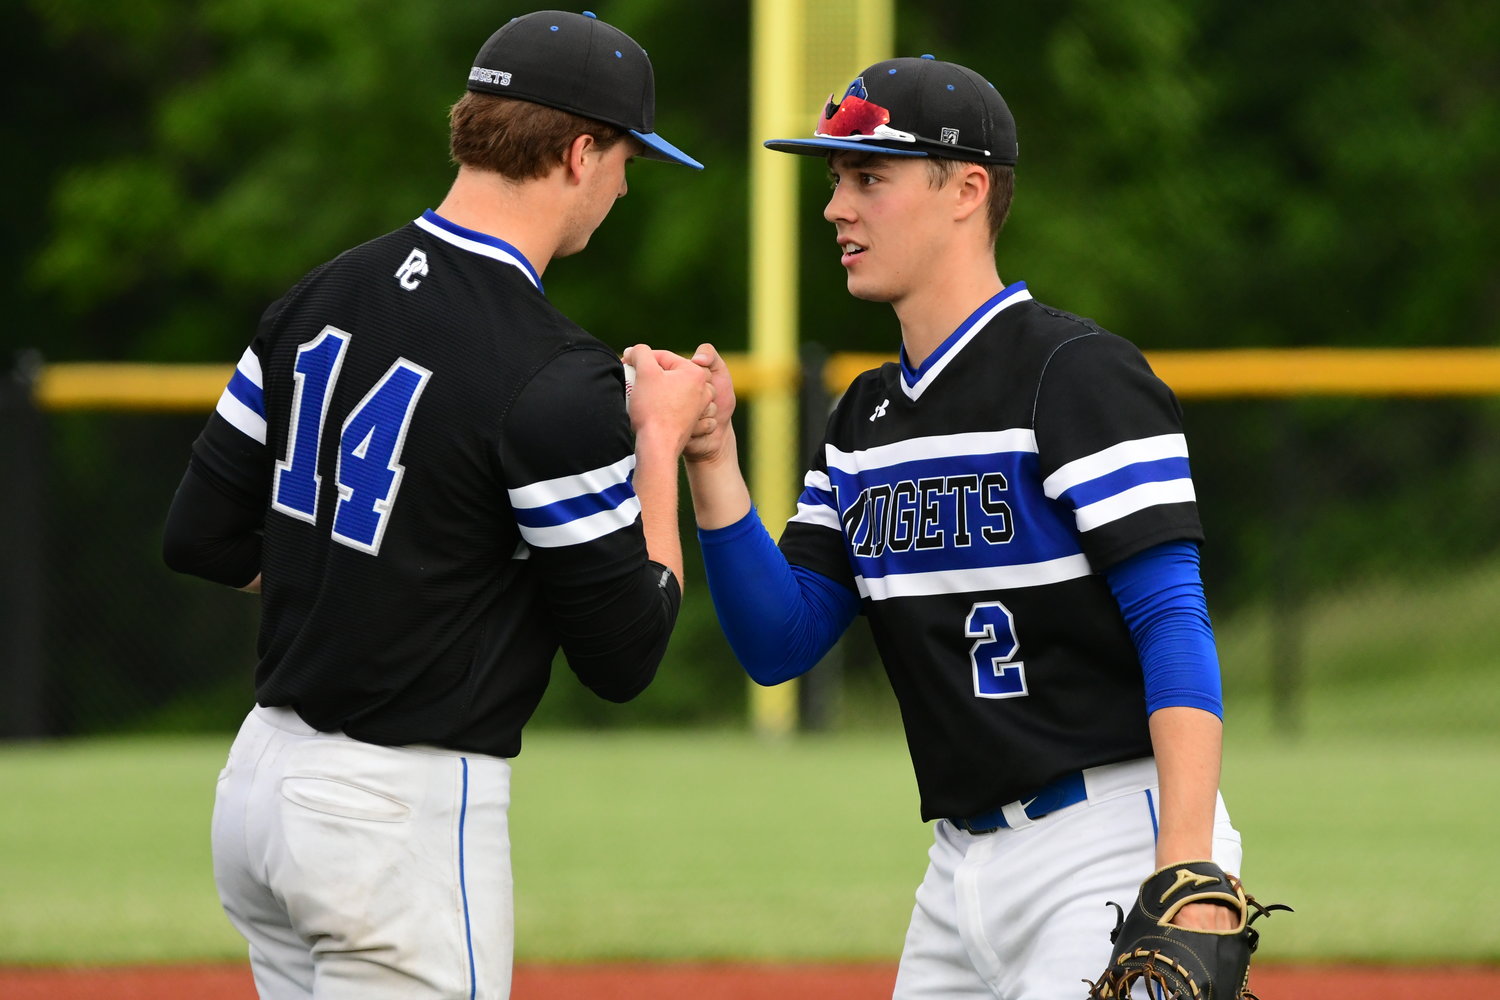 Photos from a Class 2 quarterfinal game between Putnam County and Russellville, held on May 25, 2022, in Mokane.